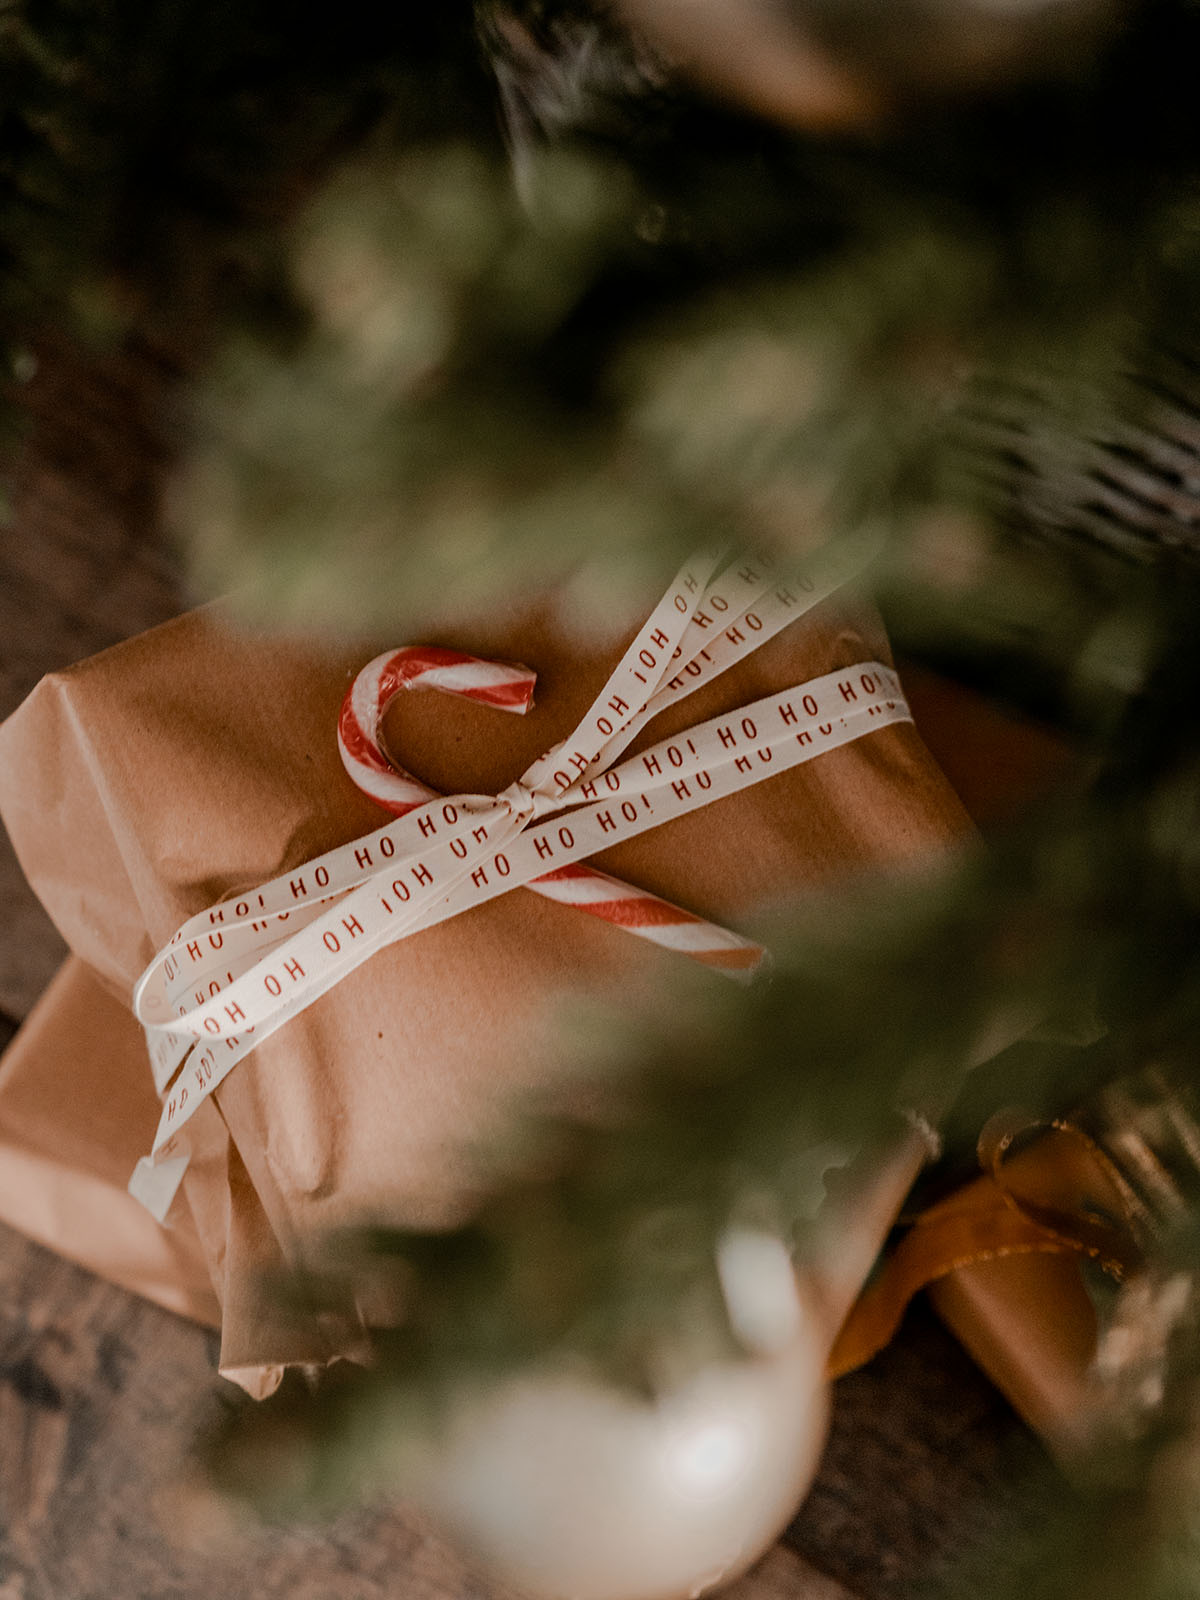 december round up christmas photos photo diary photography 2019 round-up